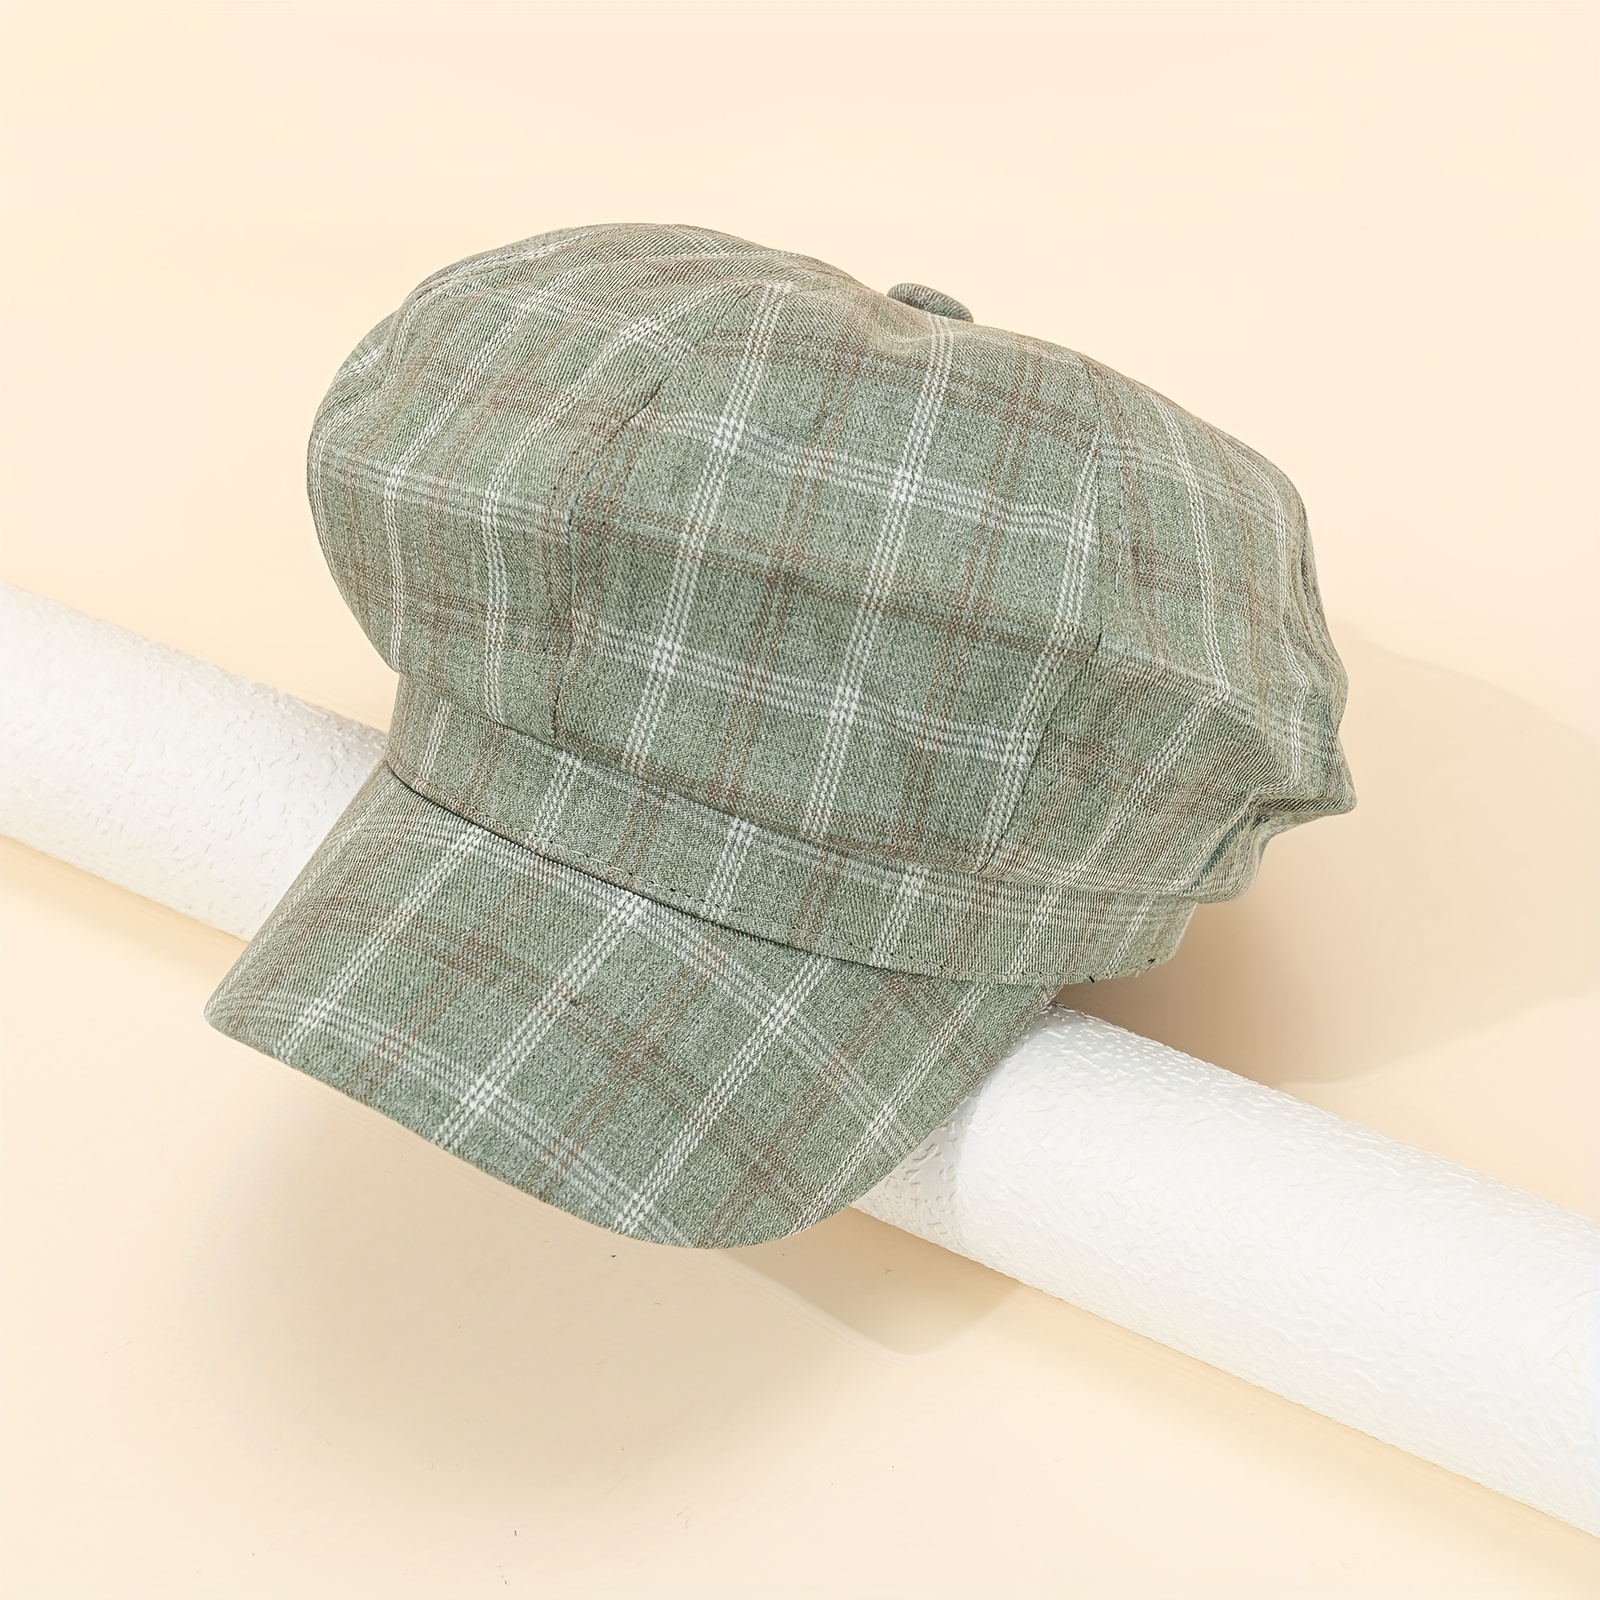 1 Pc Womens Plaid Sun Visor Hat Breathable Protective Outdoor